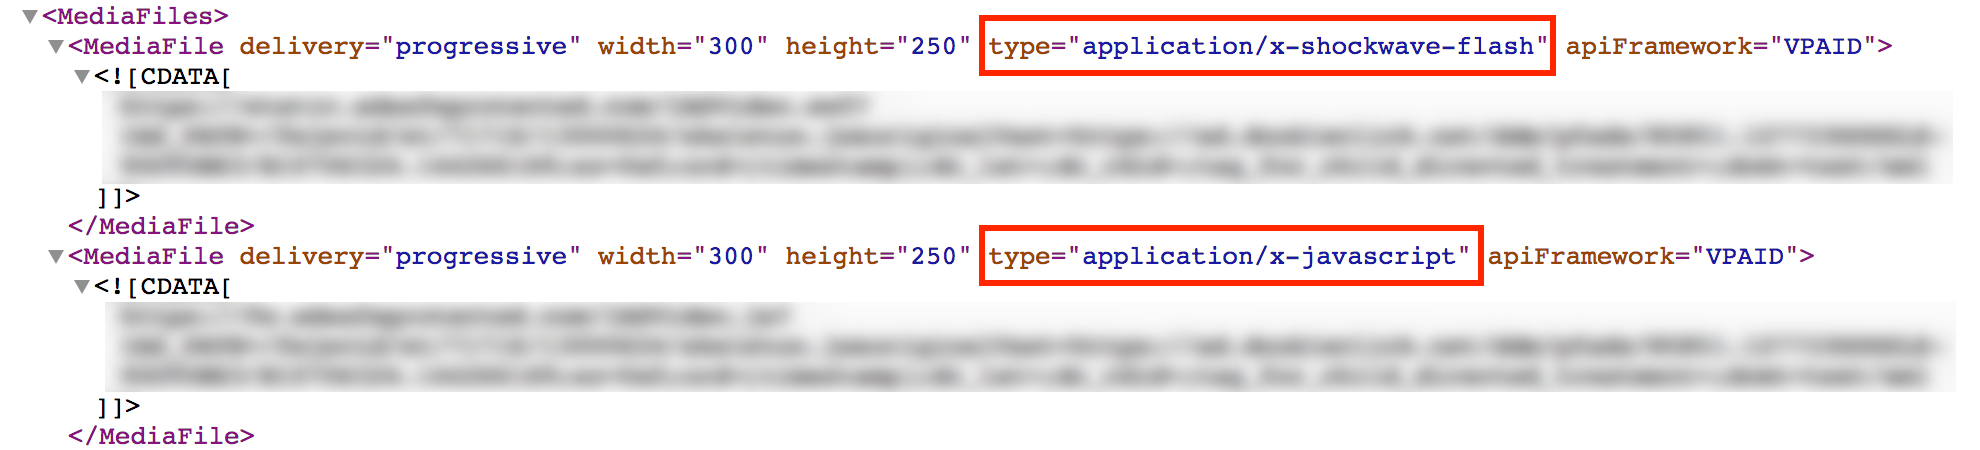 Screenshot that illustrates Sample XML with recommended VPAID formats: